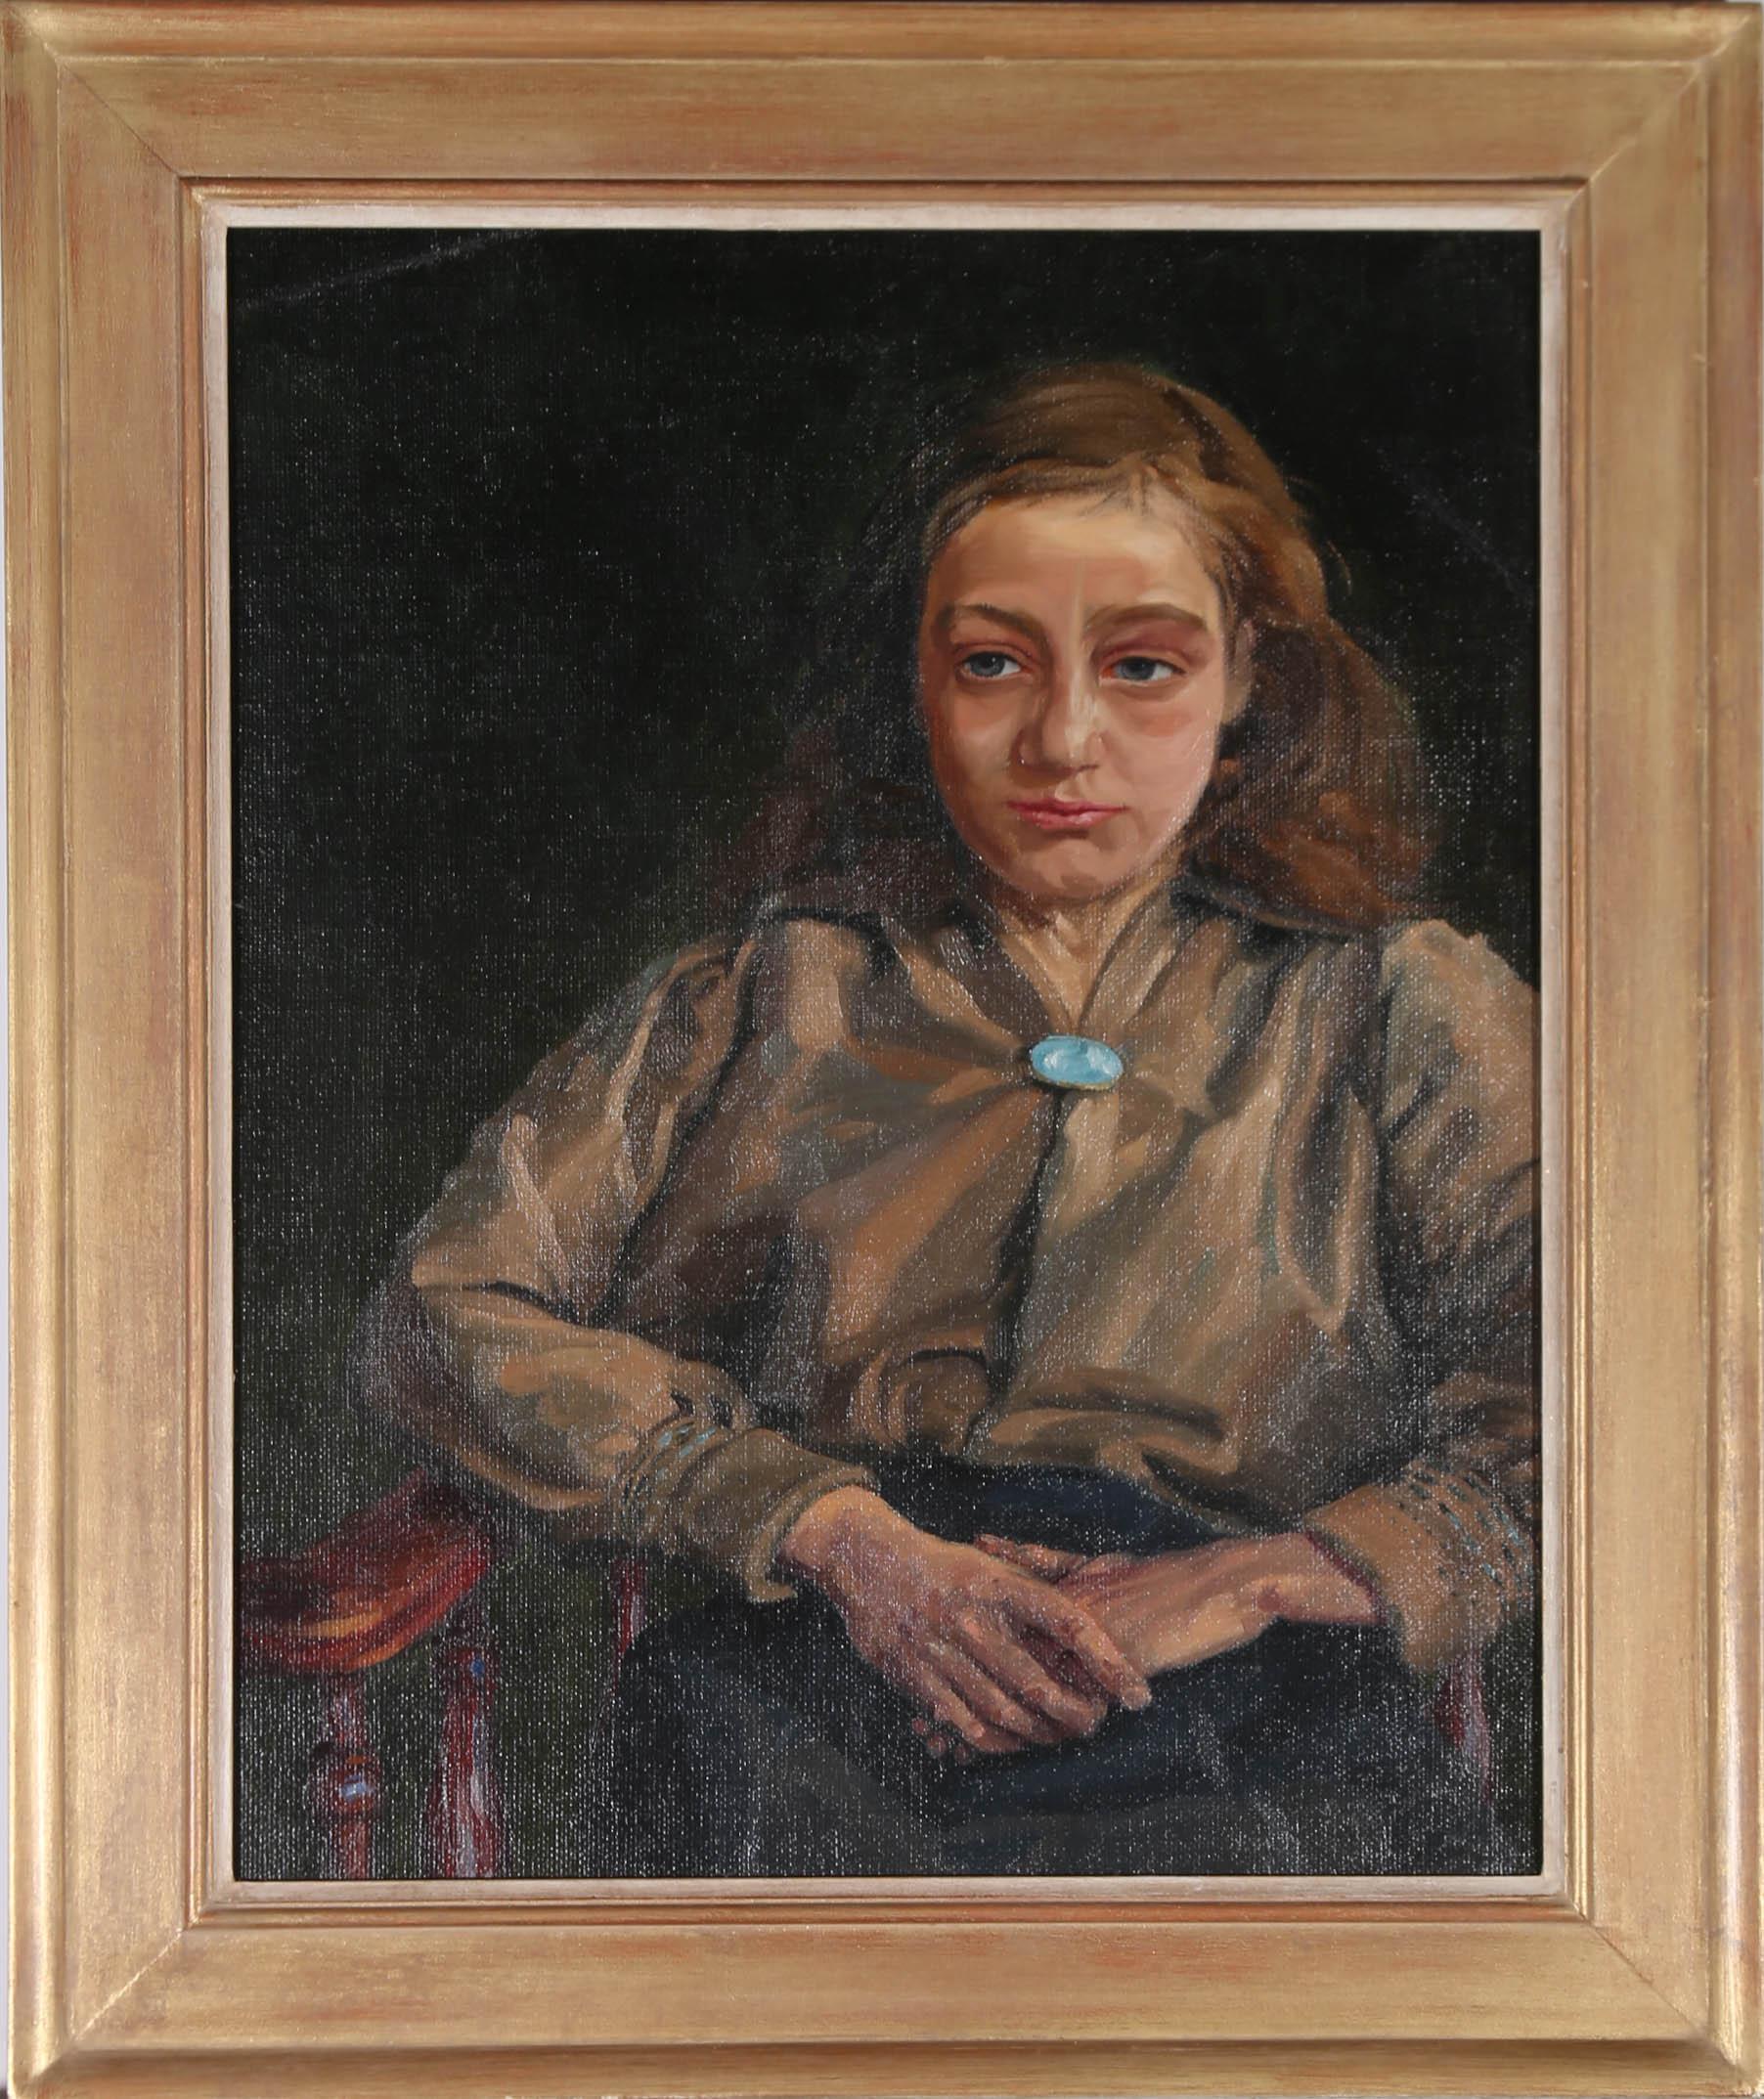 20th Century Oil - Tired Girl - Painting by Unknown